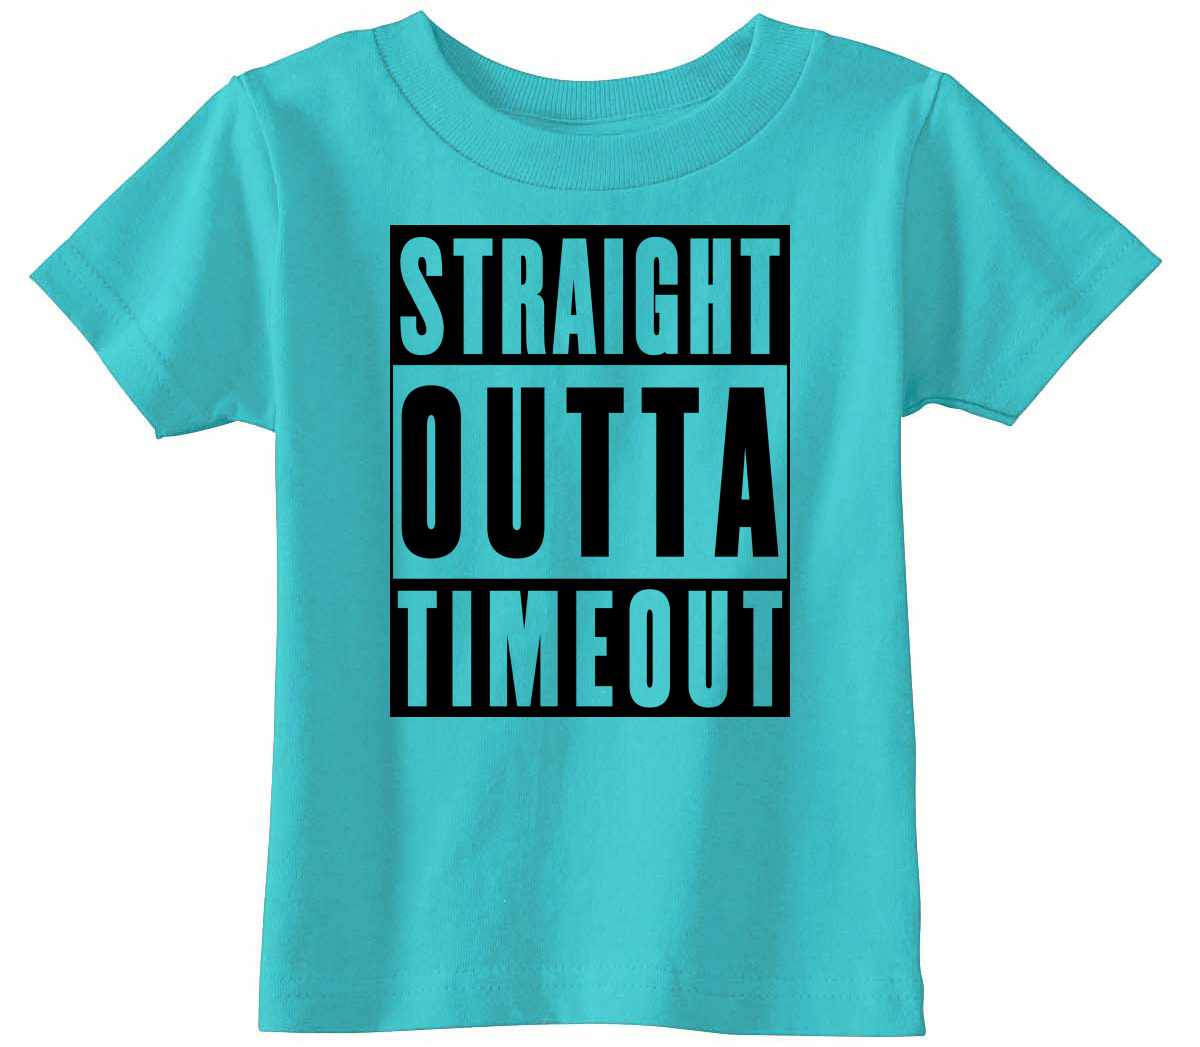 Straight Outta TimeOut Infant/Toddler  (#1096-7)